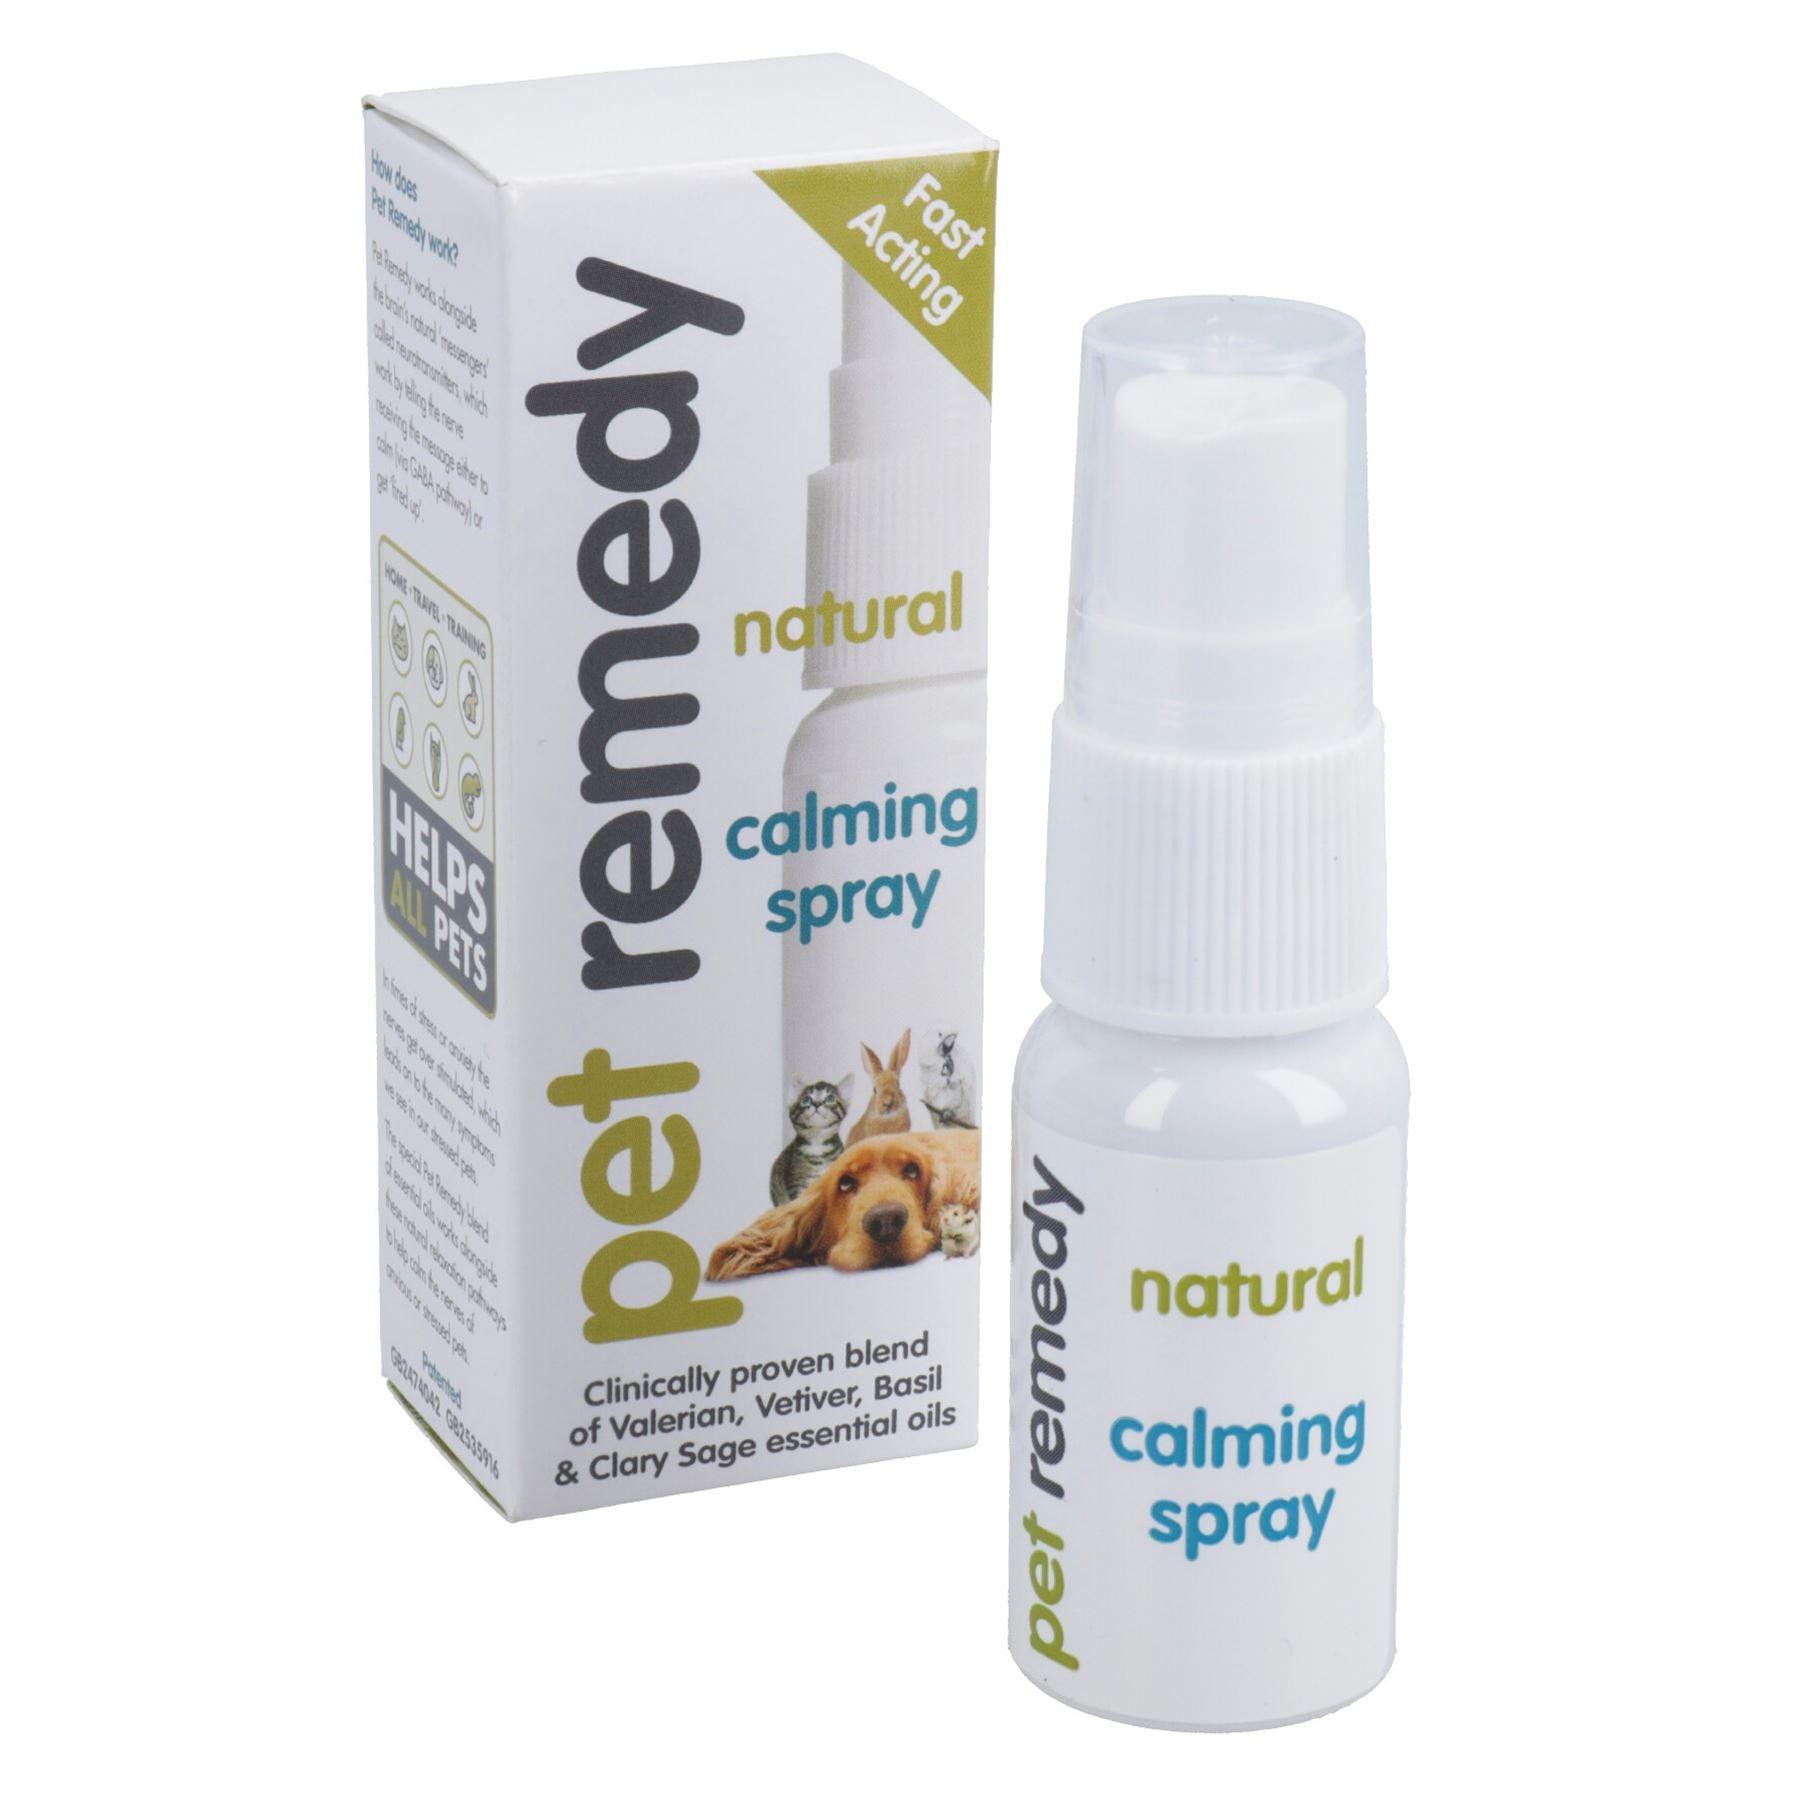 15ml Pet Remedy Natural Mini Calming Spray Dog Cat Pets Anxiety Stress Relief